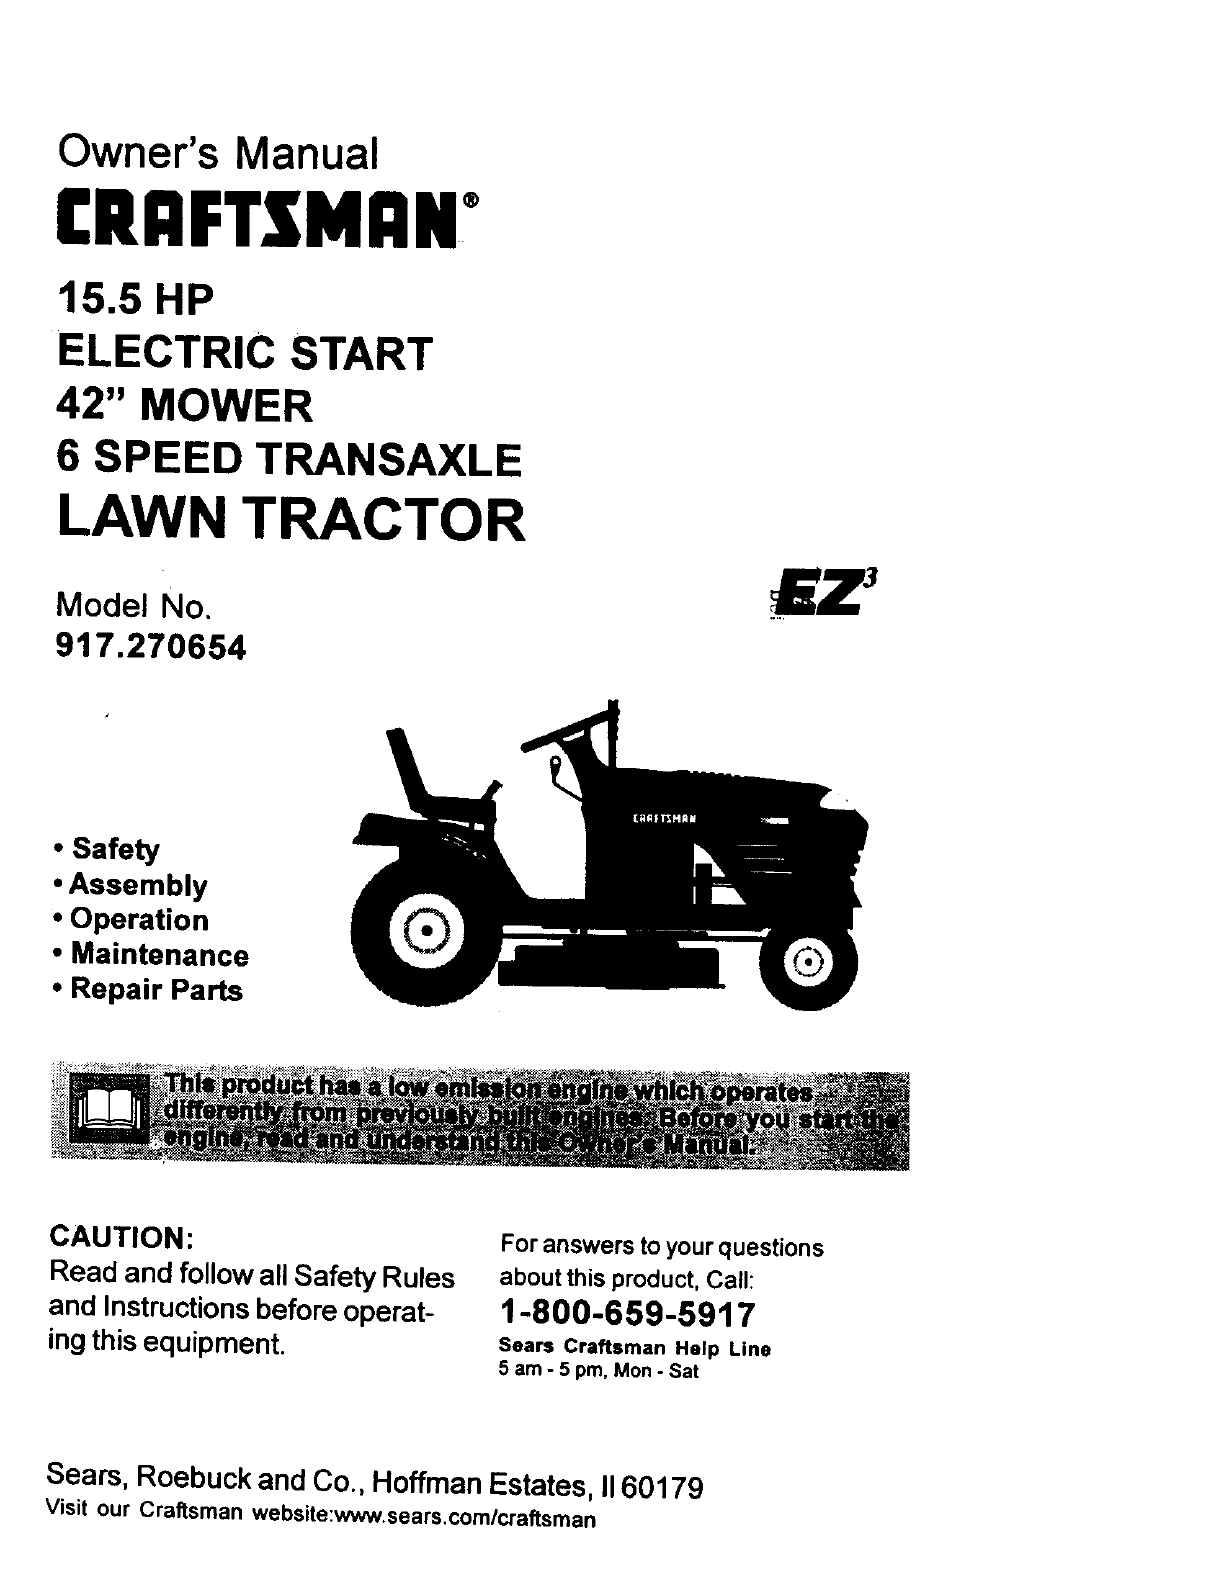 Craftsman 917270654 User Manual 15 5hp 42 Lawn Tractor Manuals And Guides L0020119